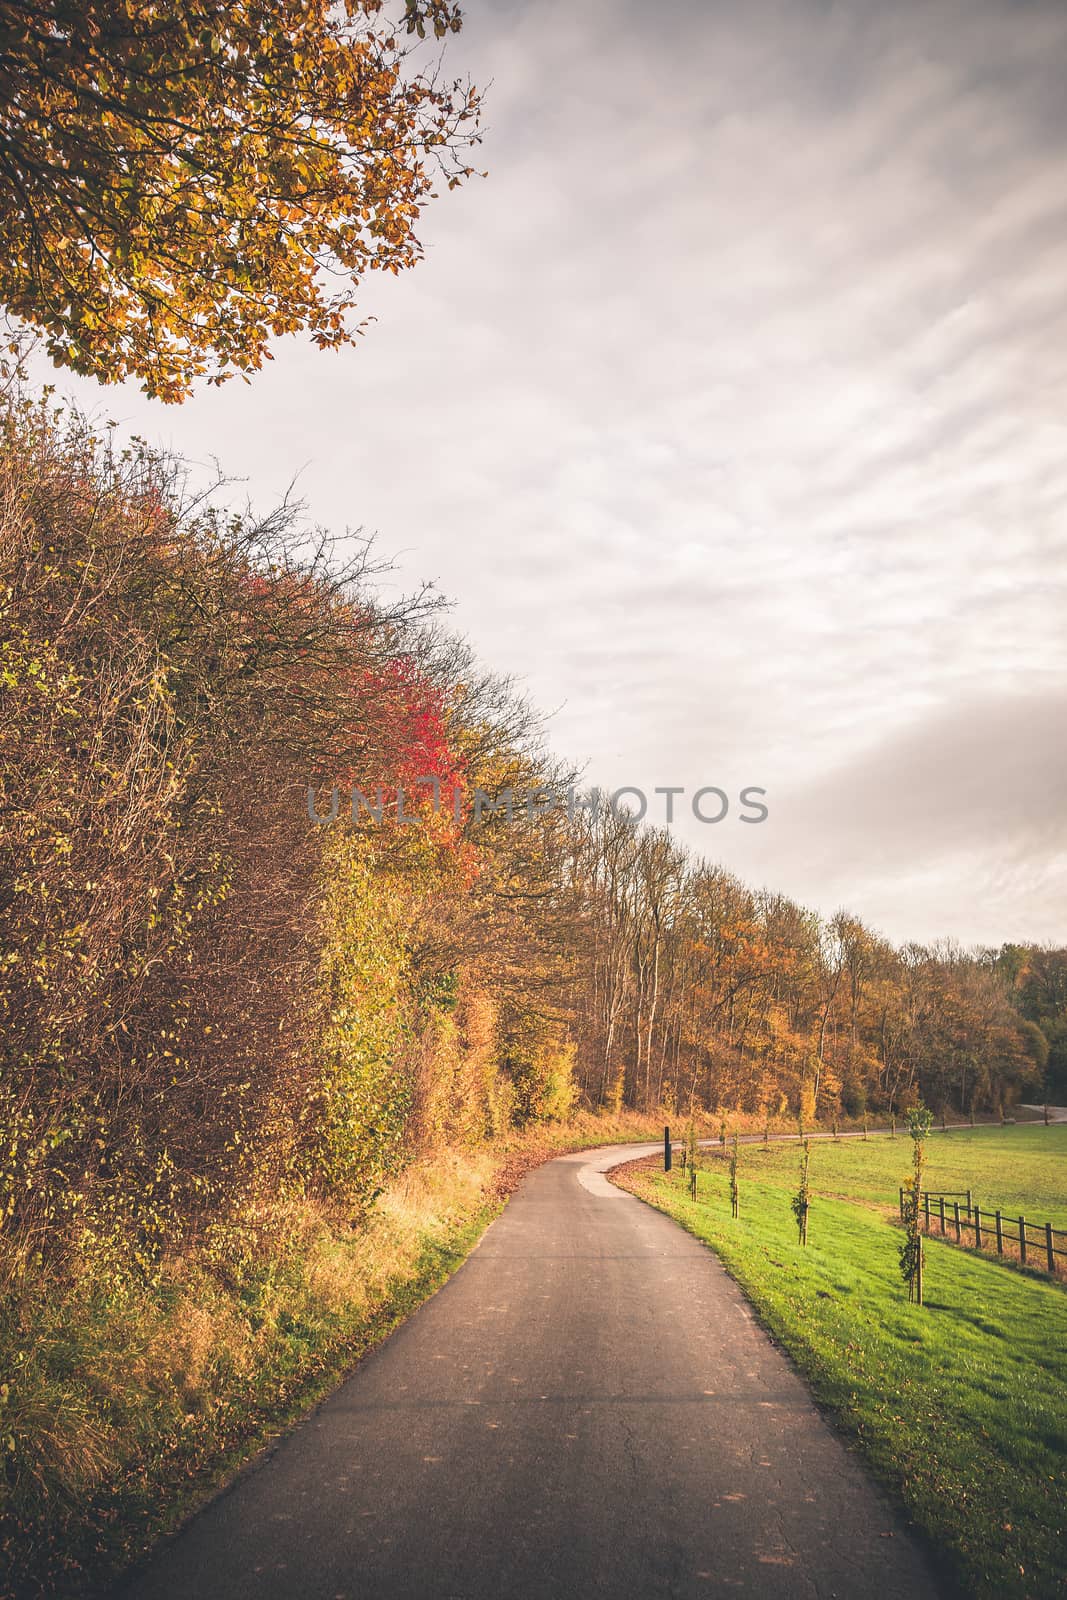 Countryside road passing through a rural environment by Sportactive